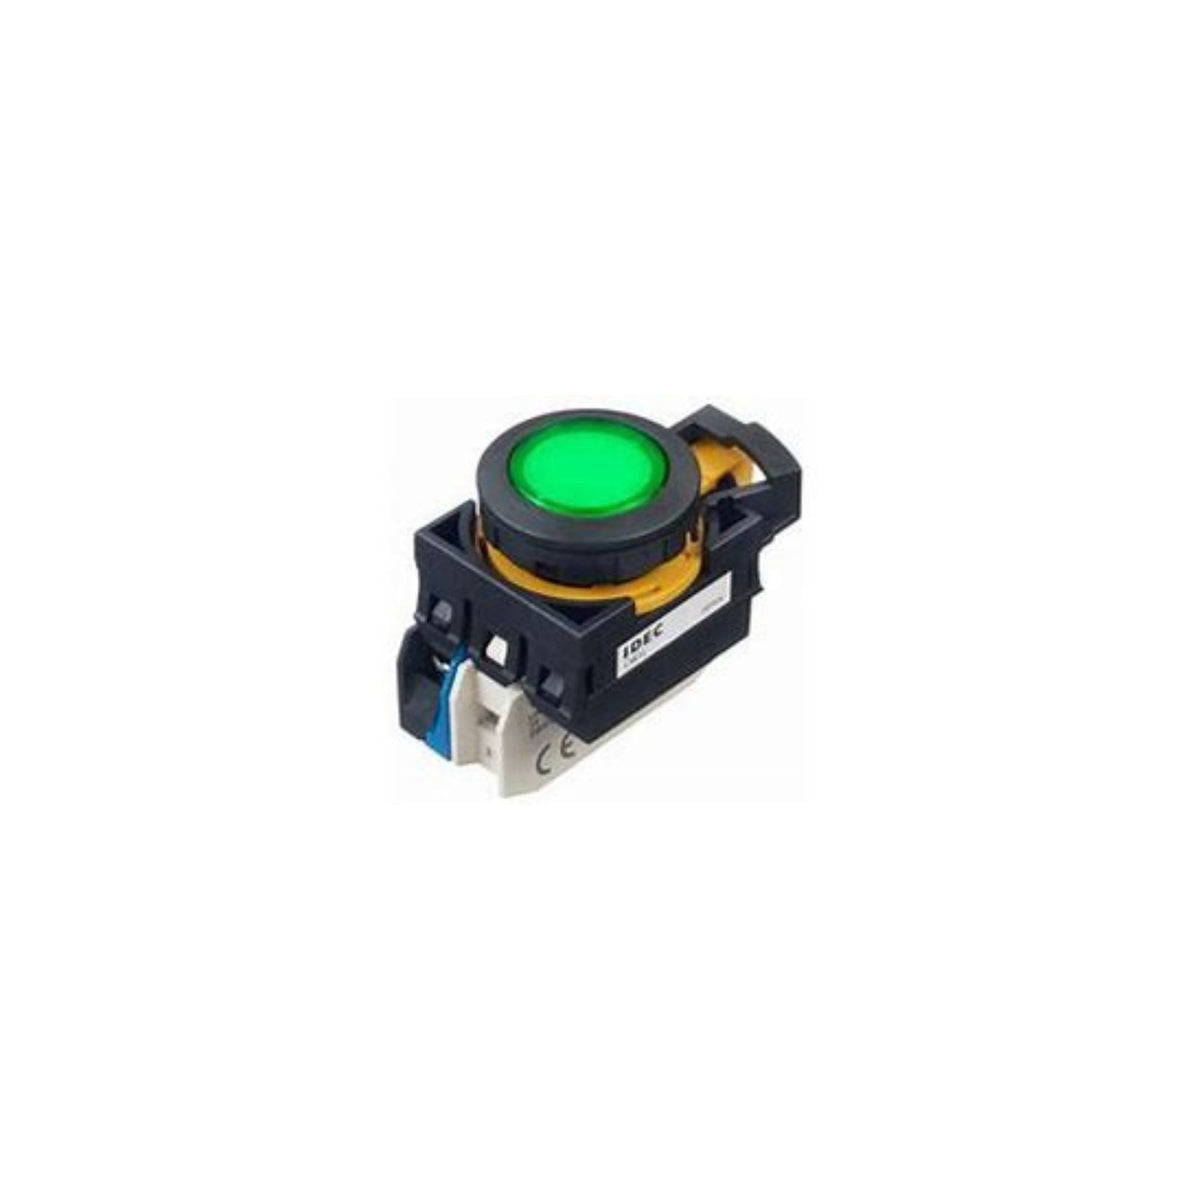 Black housing with round black bezeled push button with illuminated green button